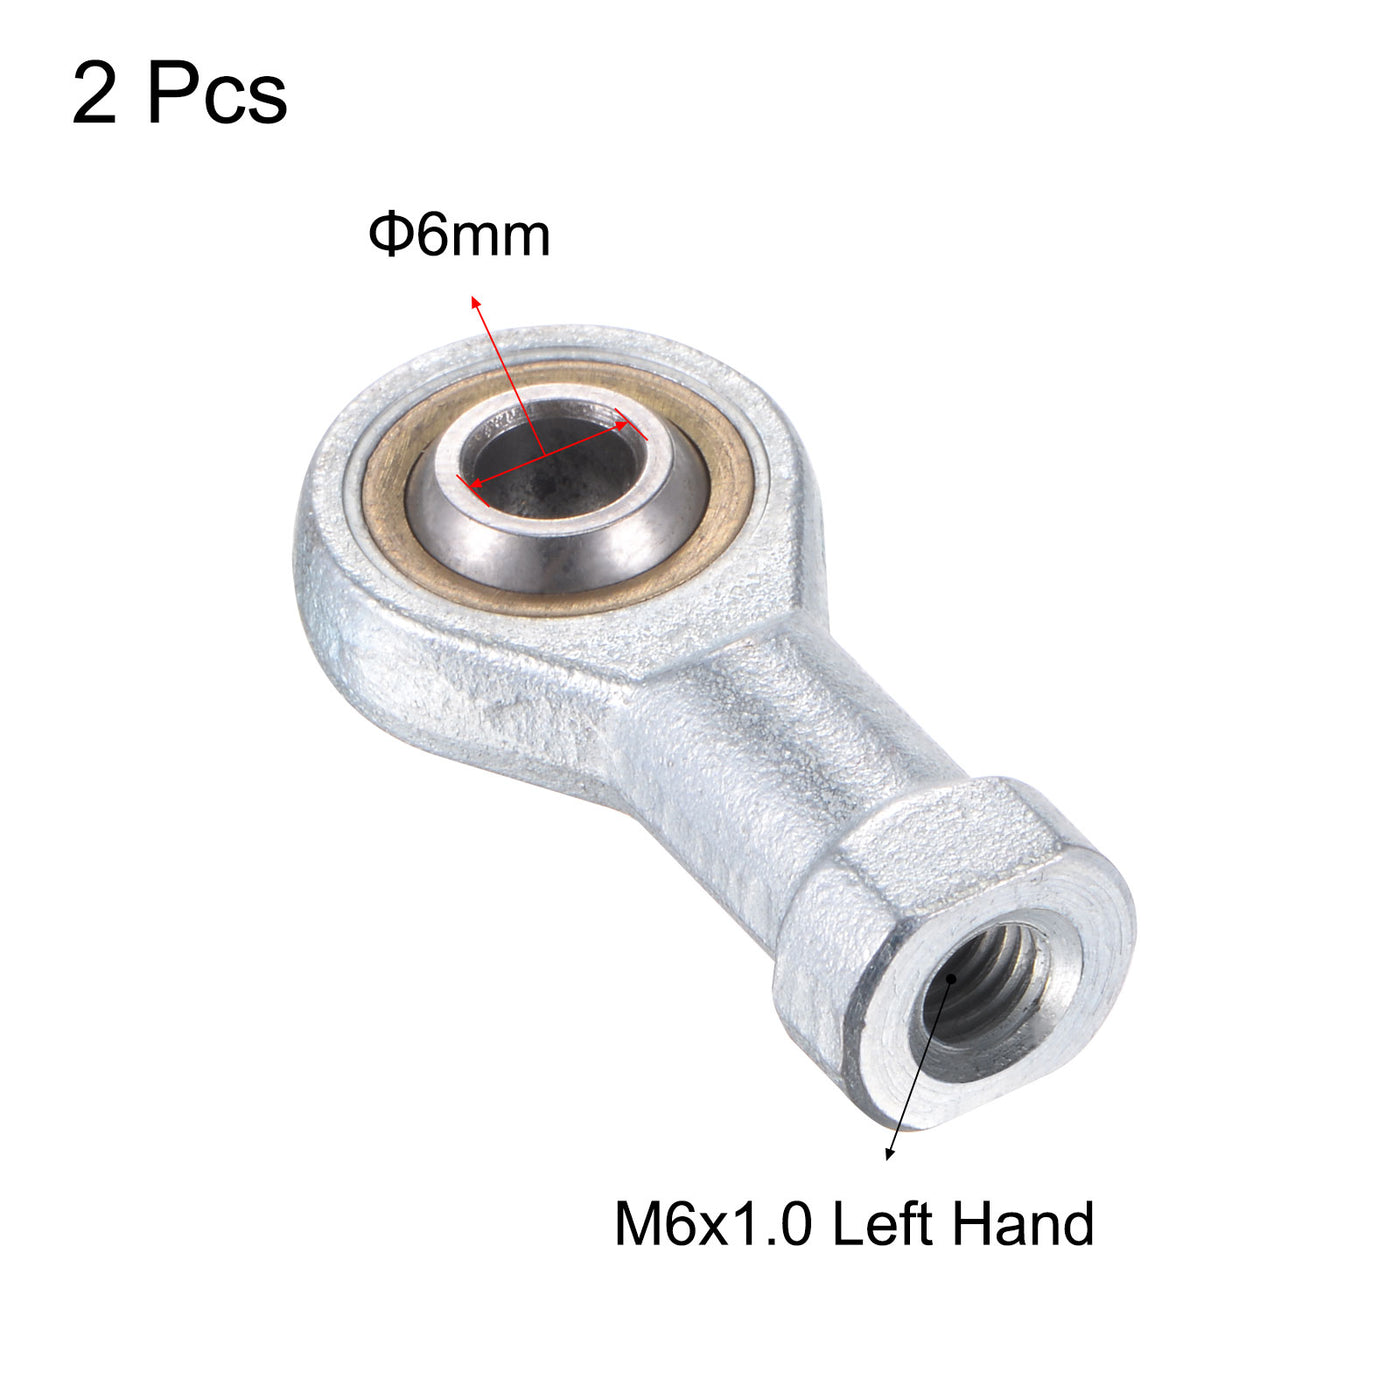 uxcell Uxcell 2pcs SI6TK PHSA6 Rod End Bearing 6mm Bore M6x1.0 Left Hand Female Thread